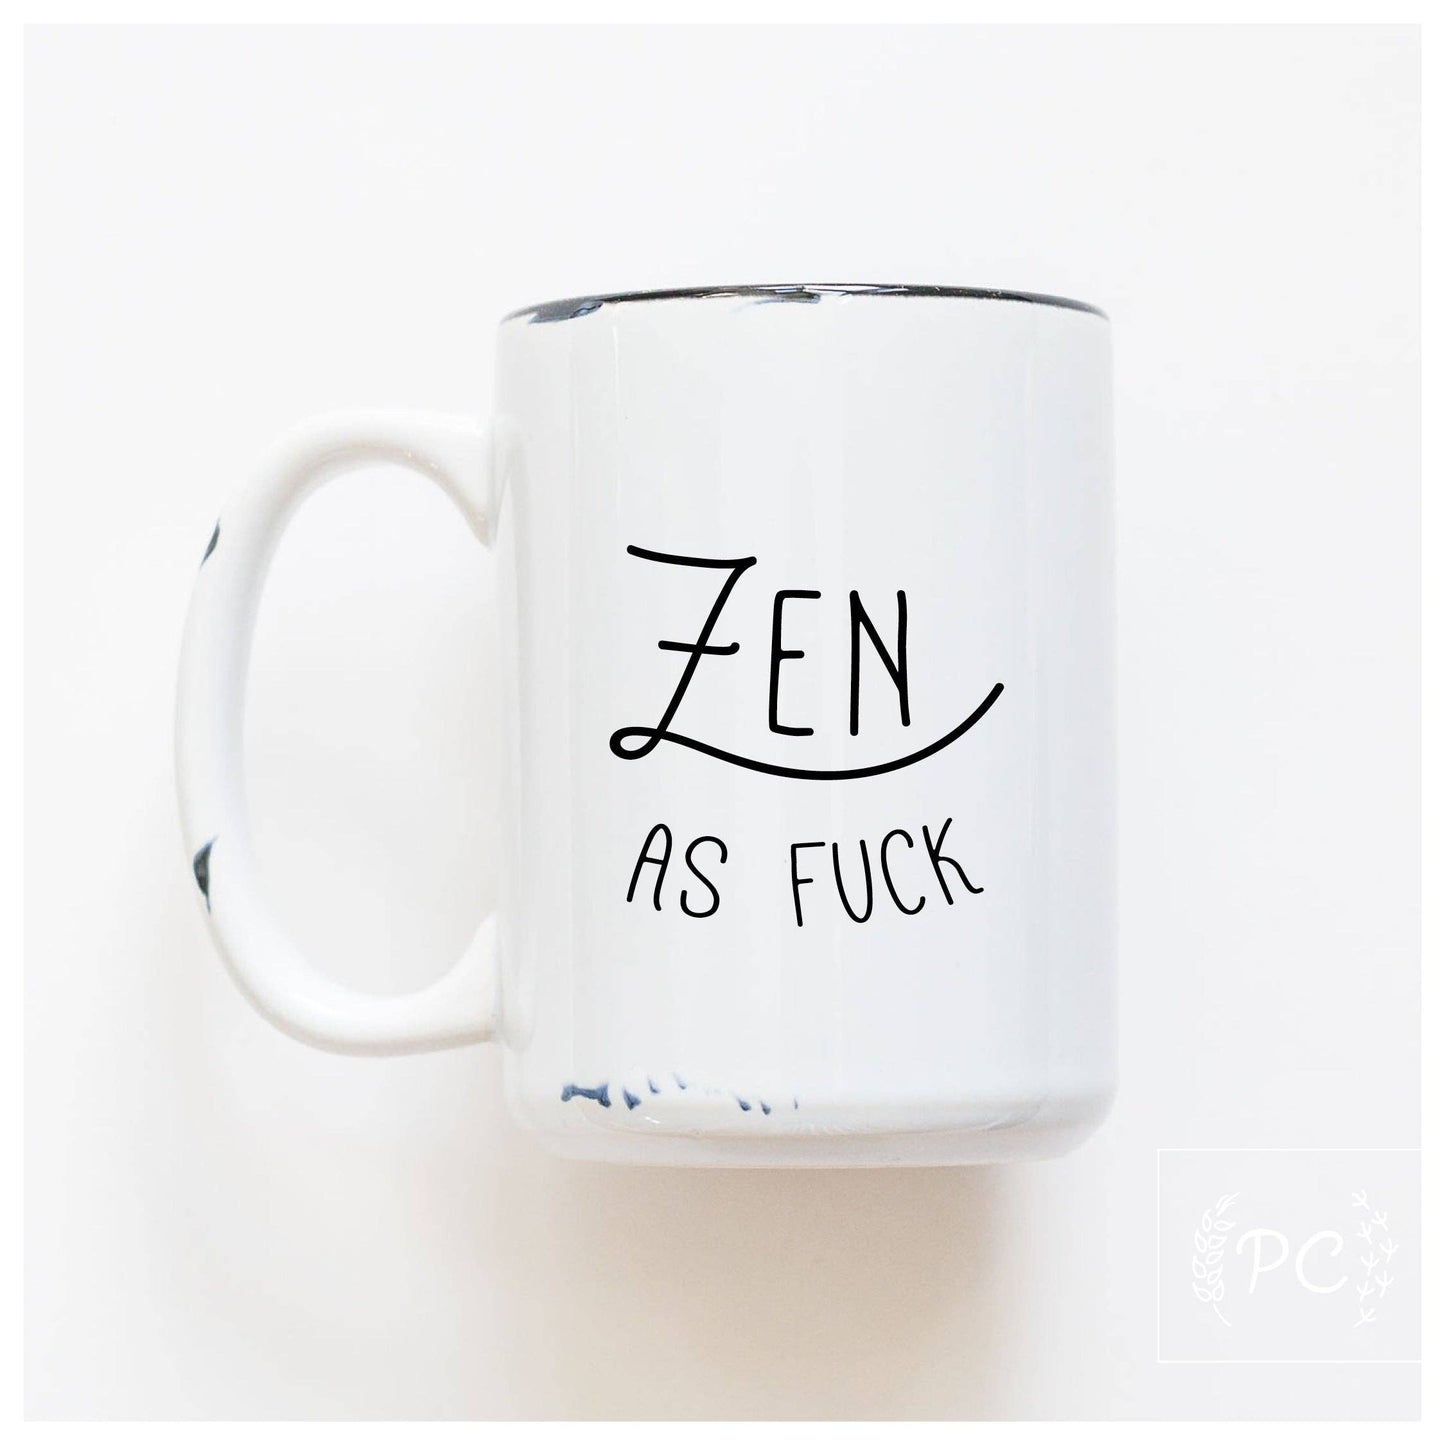 Ceramic Mug in White - Zen as fuck - Witches Ink LTD - O/A Crystals and Sun Signs